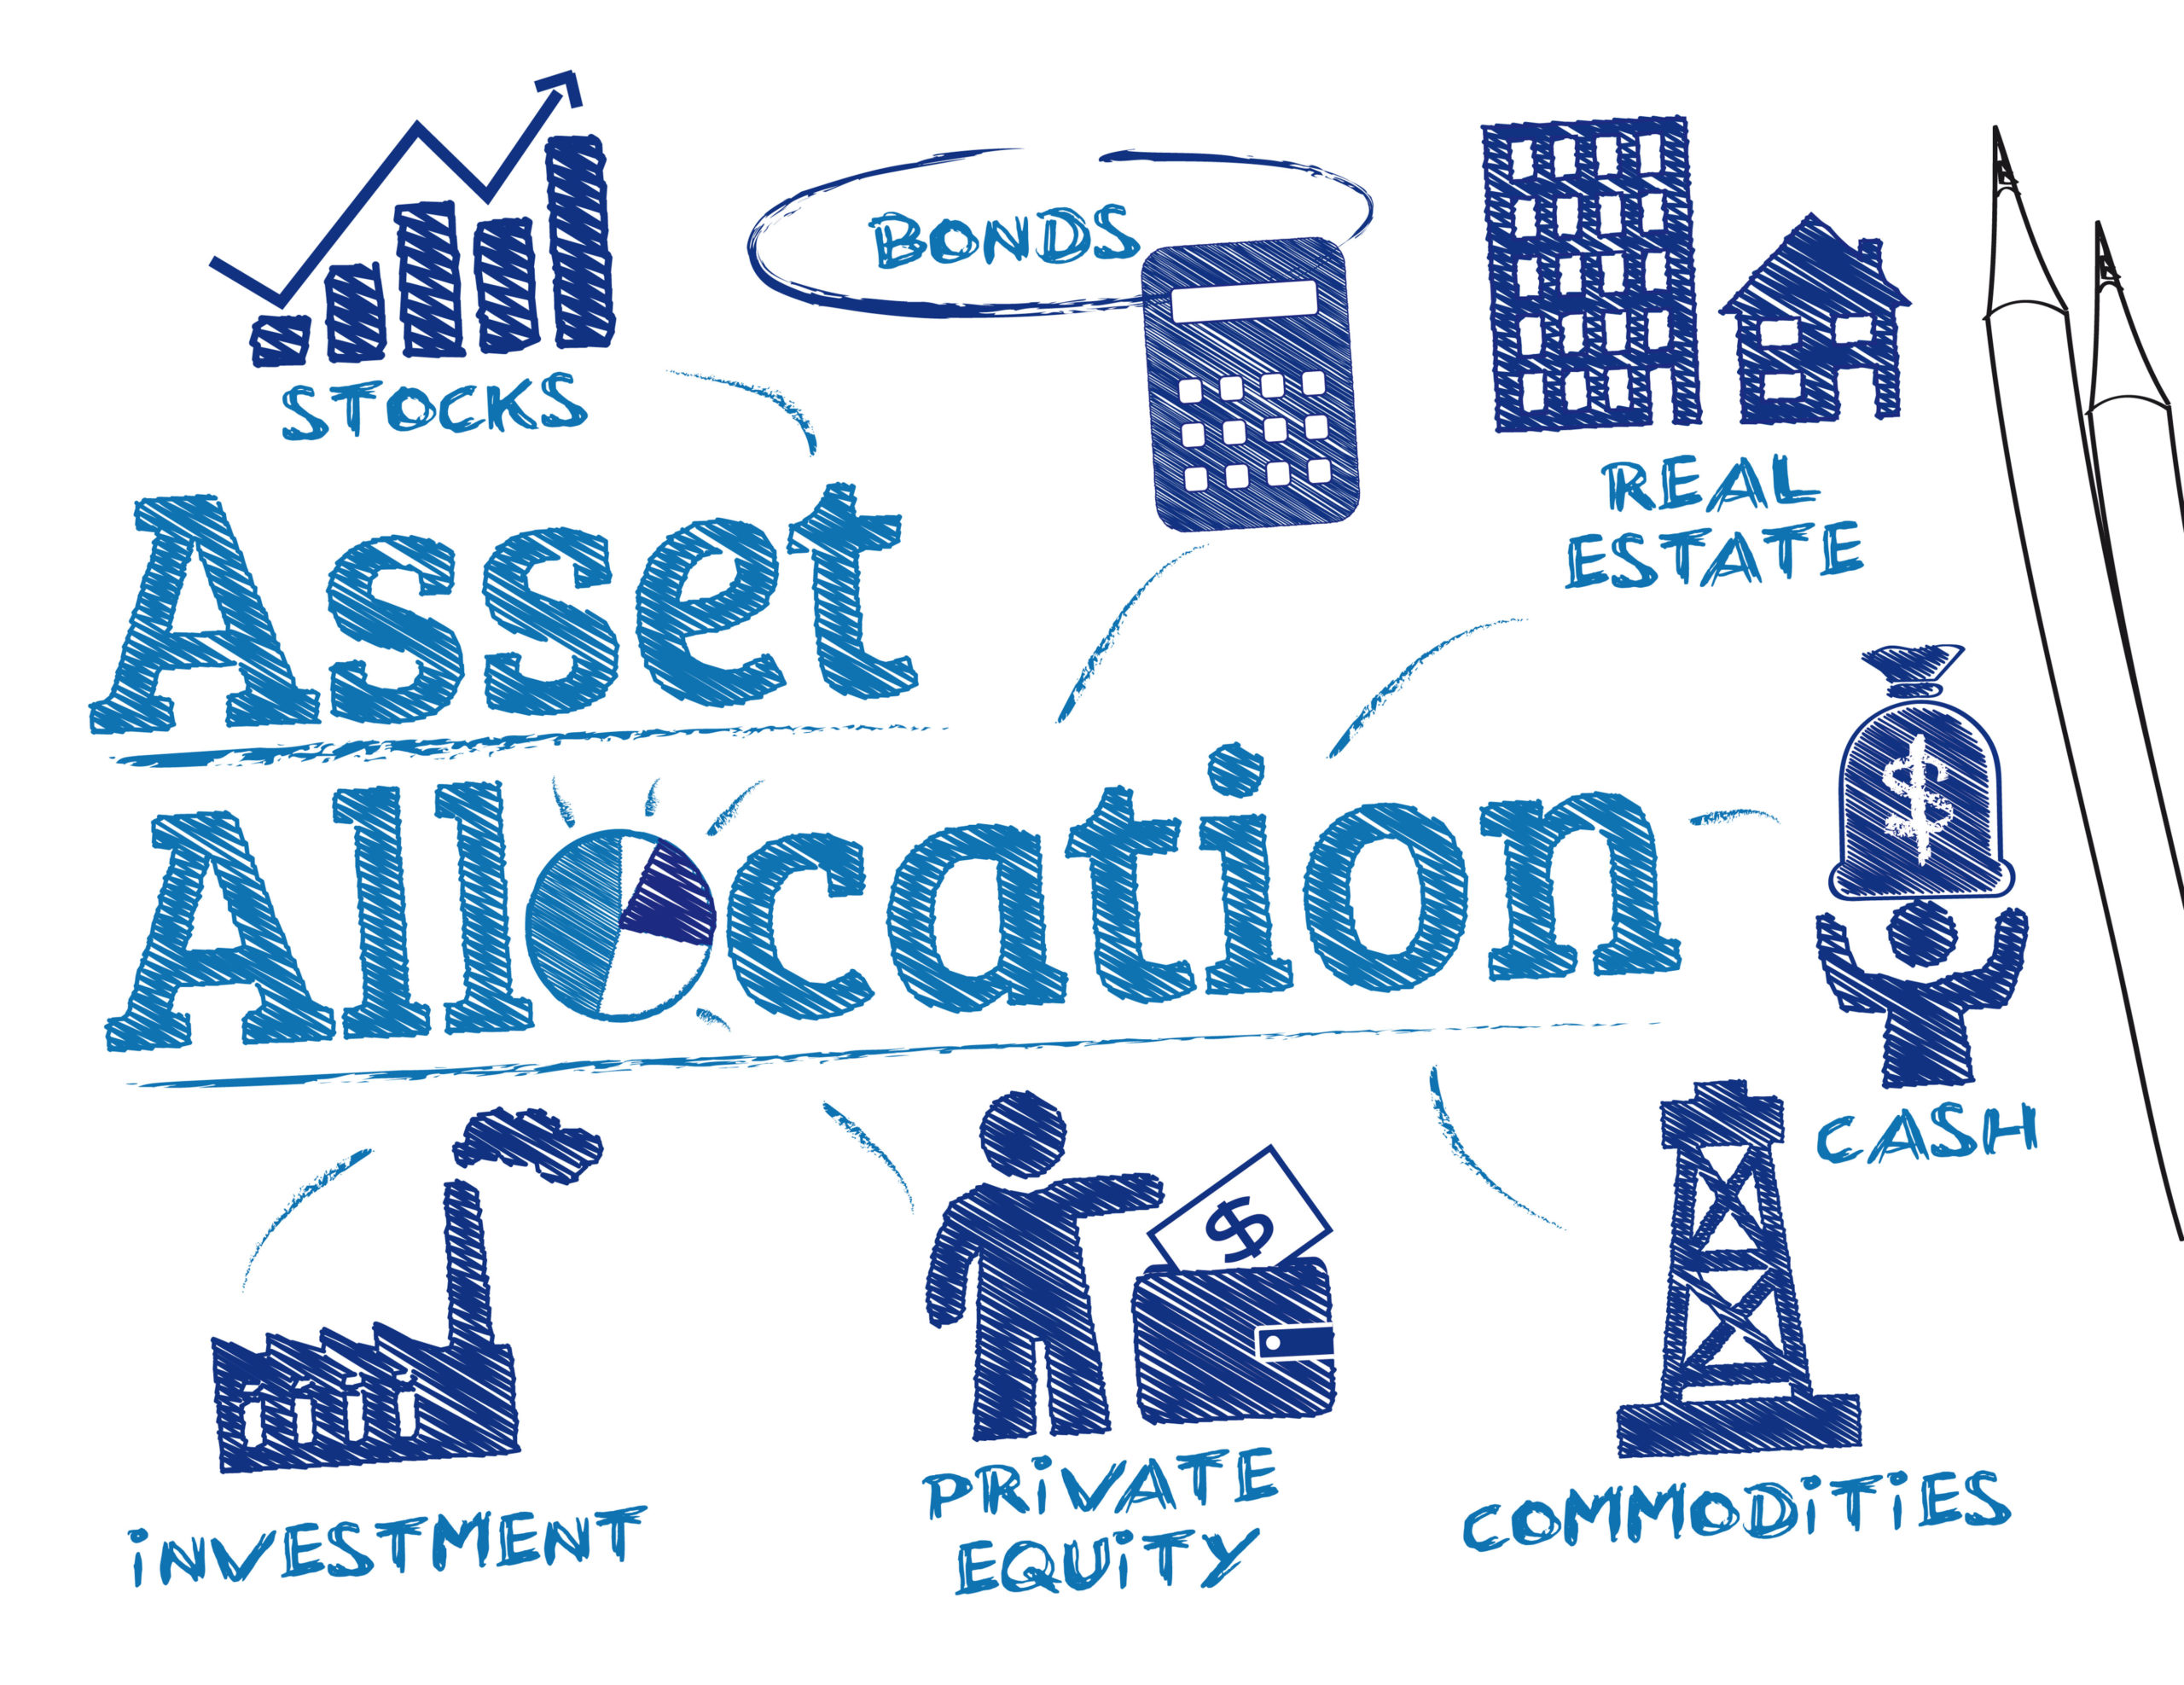 What is Asset Allocation?